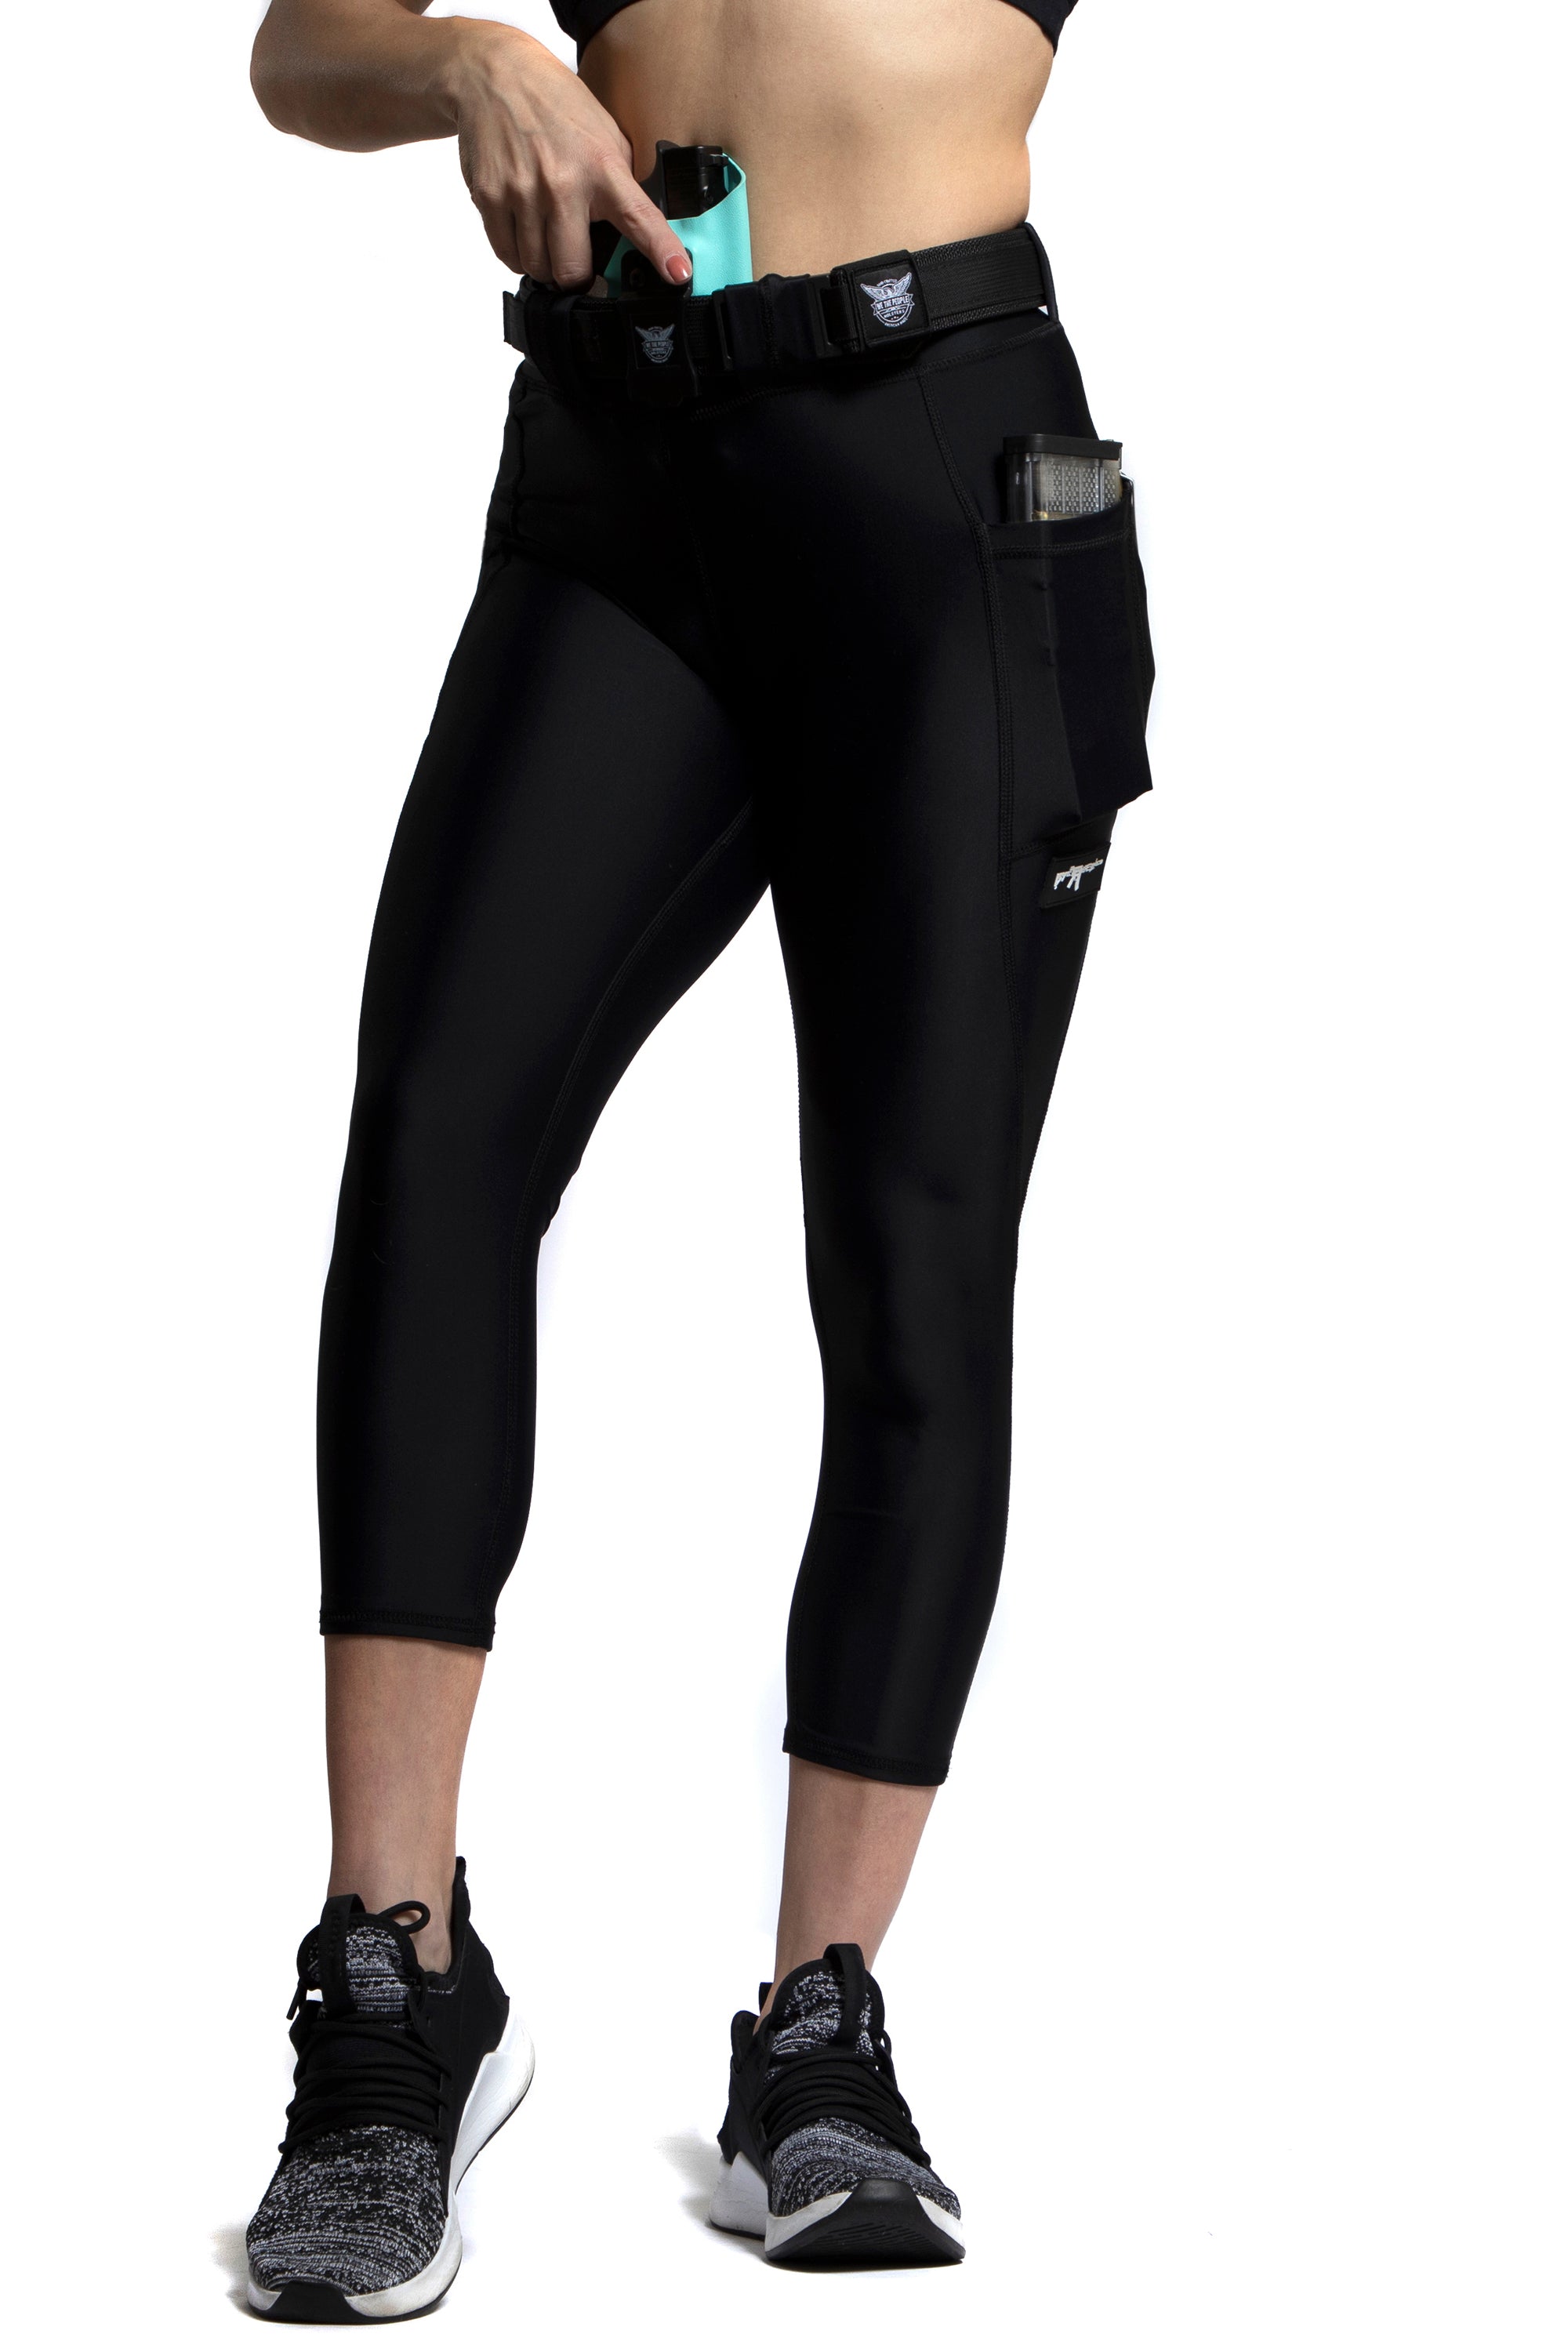 We The People Holsters Tactical Concealed Carry Leggings Designed  Specifically for Women • Spotter Up